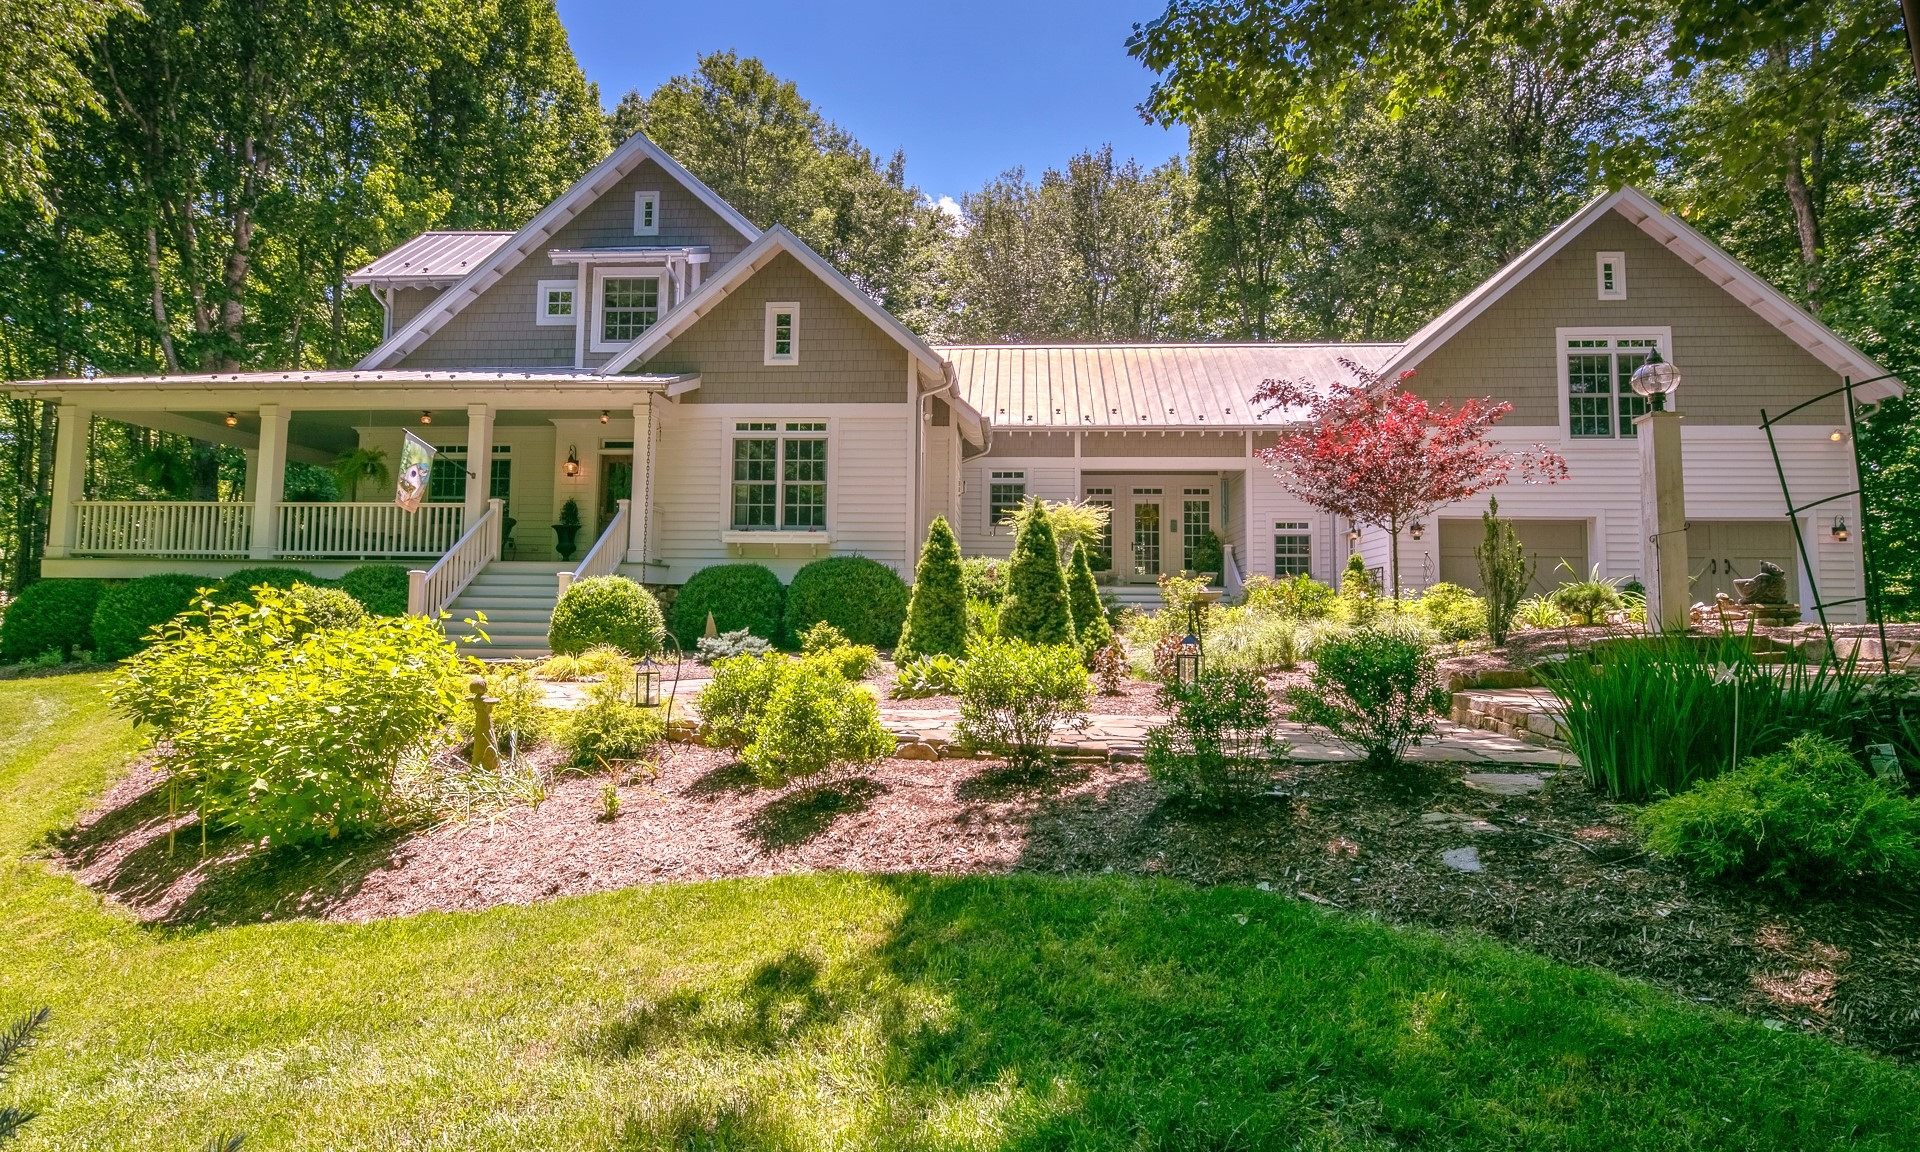 LIVE YOUR BEST LIFE HERE in this sprawling modern 4-bedroom, 4.5-bath farmhouse situated on 15.54 acres in The Ridge at Chestnut Hill, a private gated community offering picturesque mountain views and surrounding woodlands.